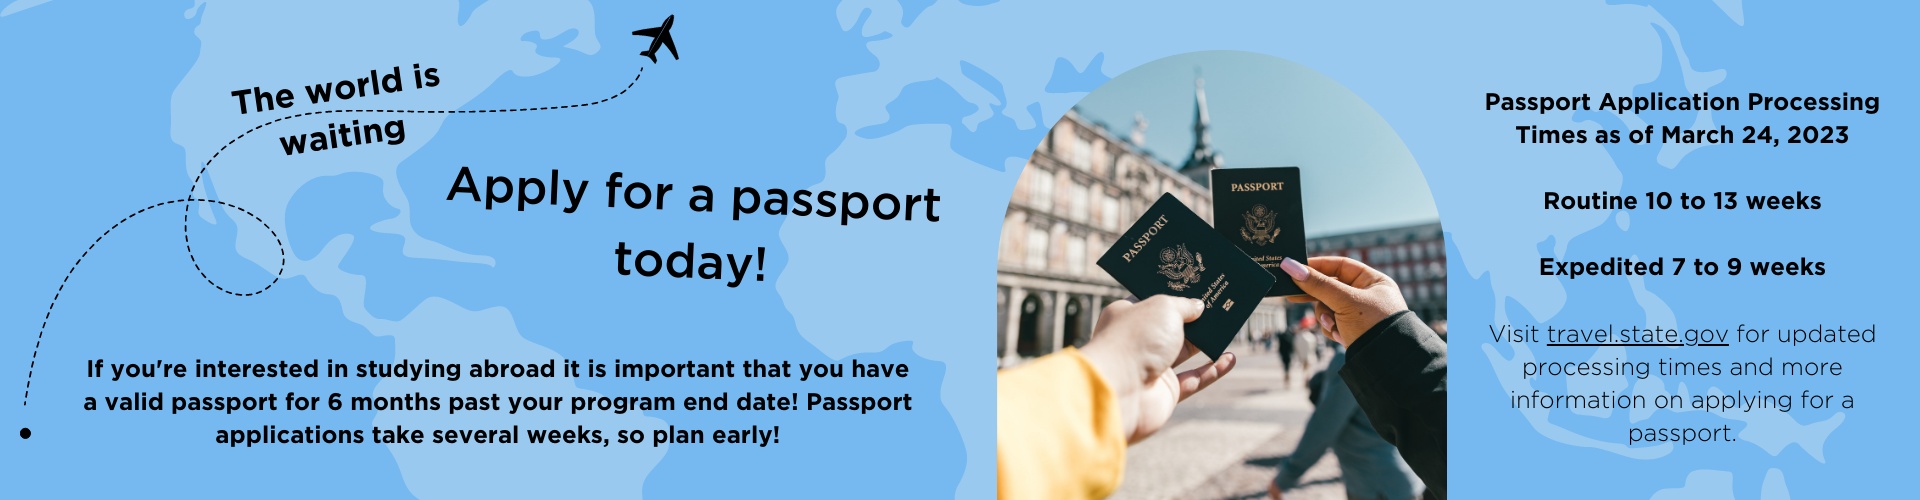 https://travel.state.gov/content/travel/en/passports/how-apply/processing-times.html